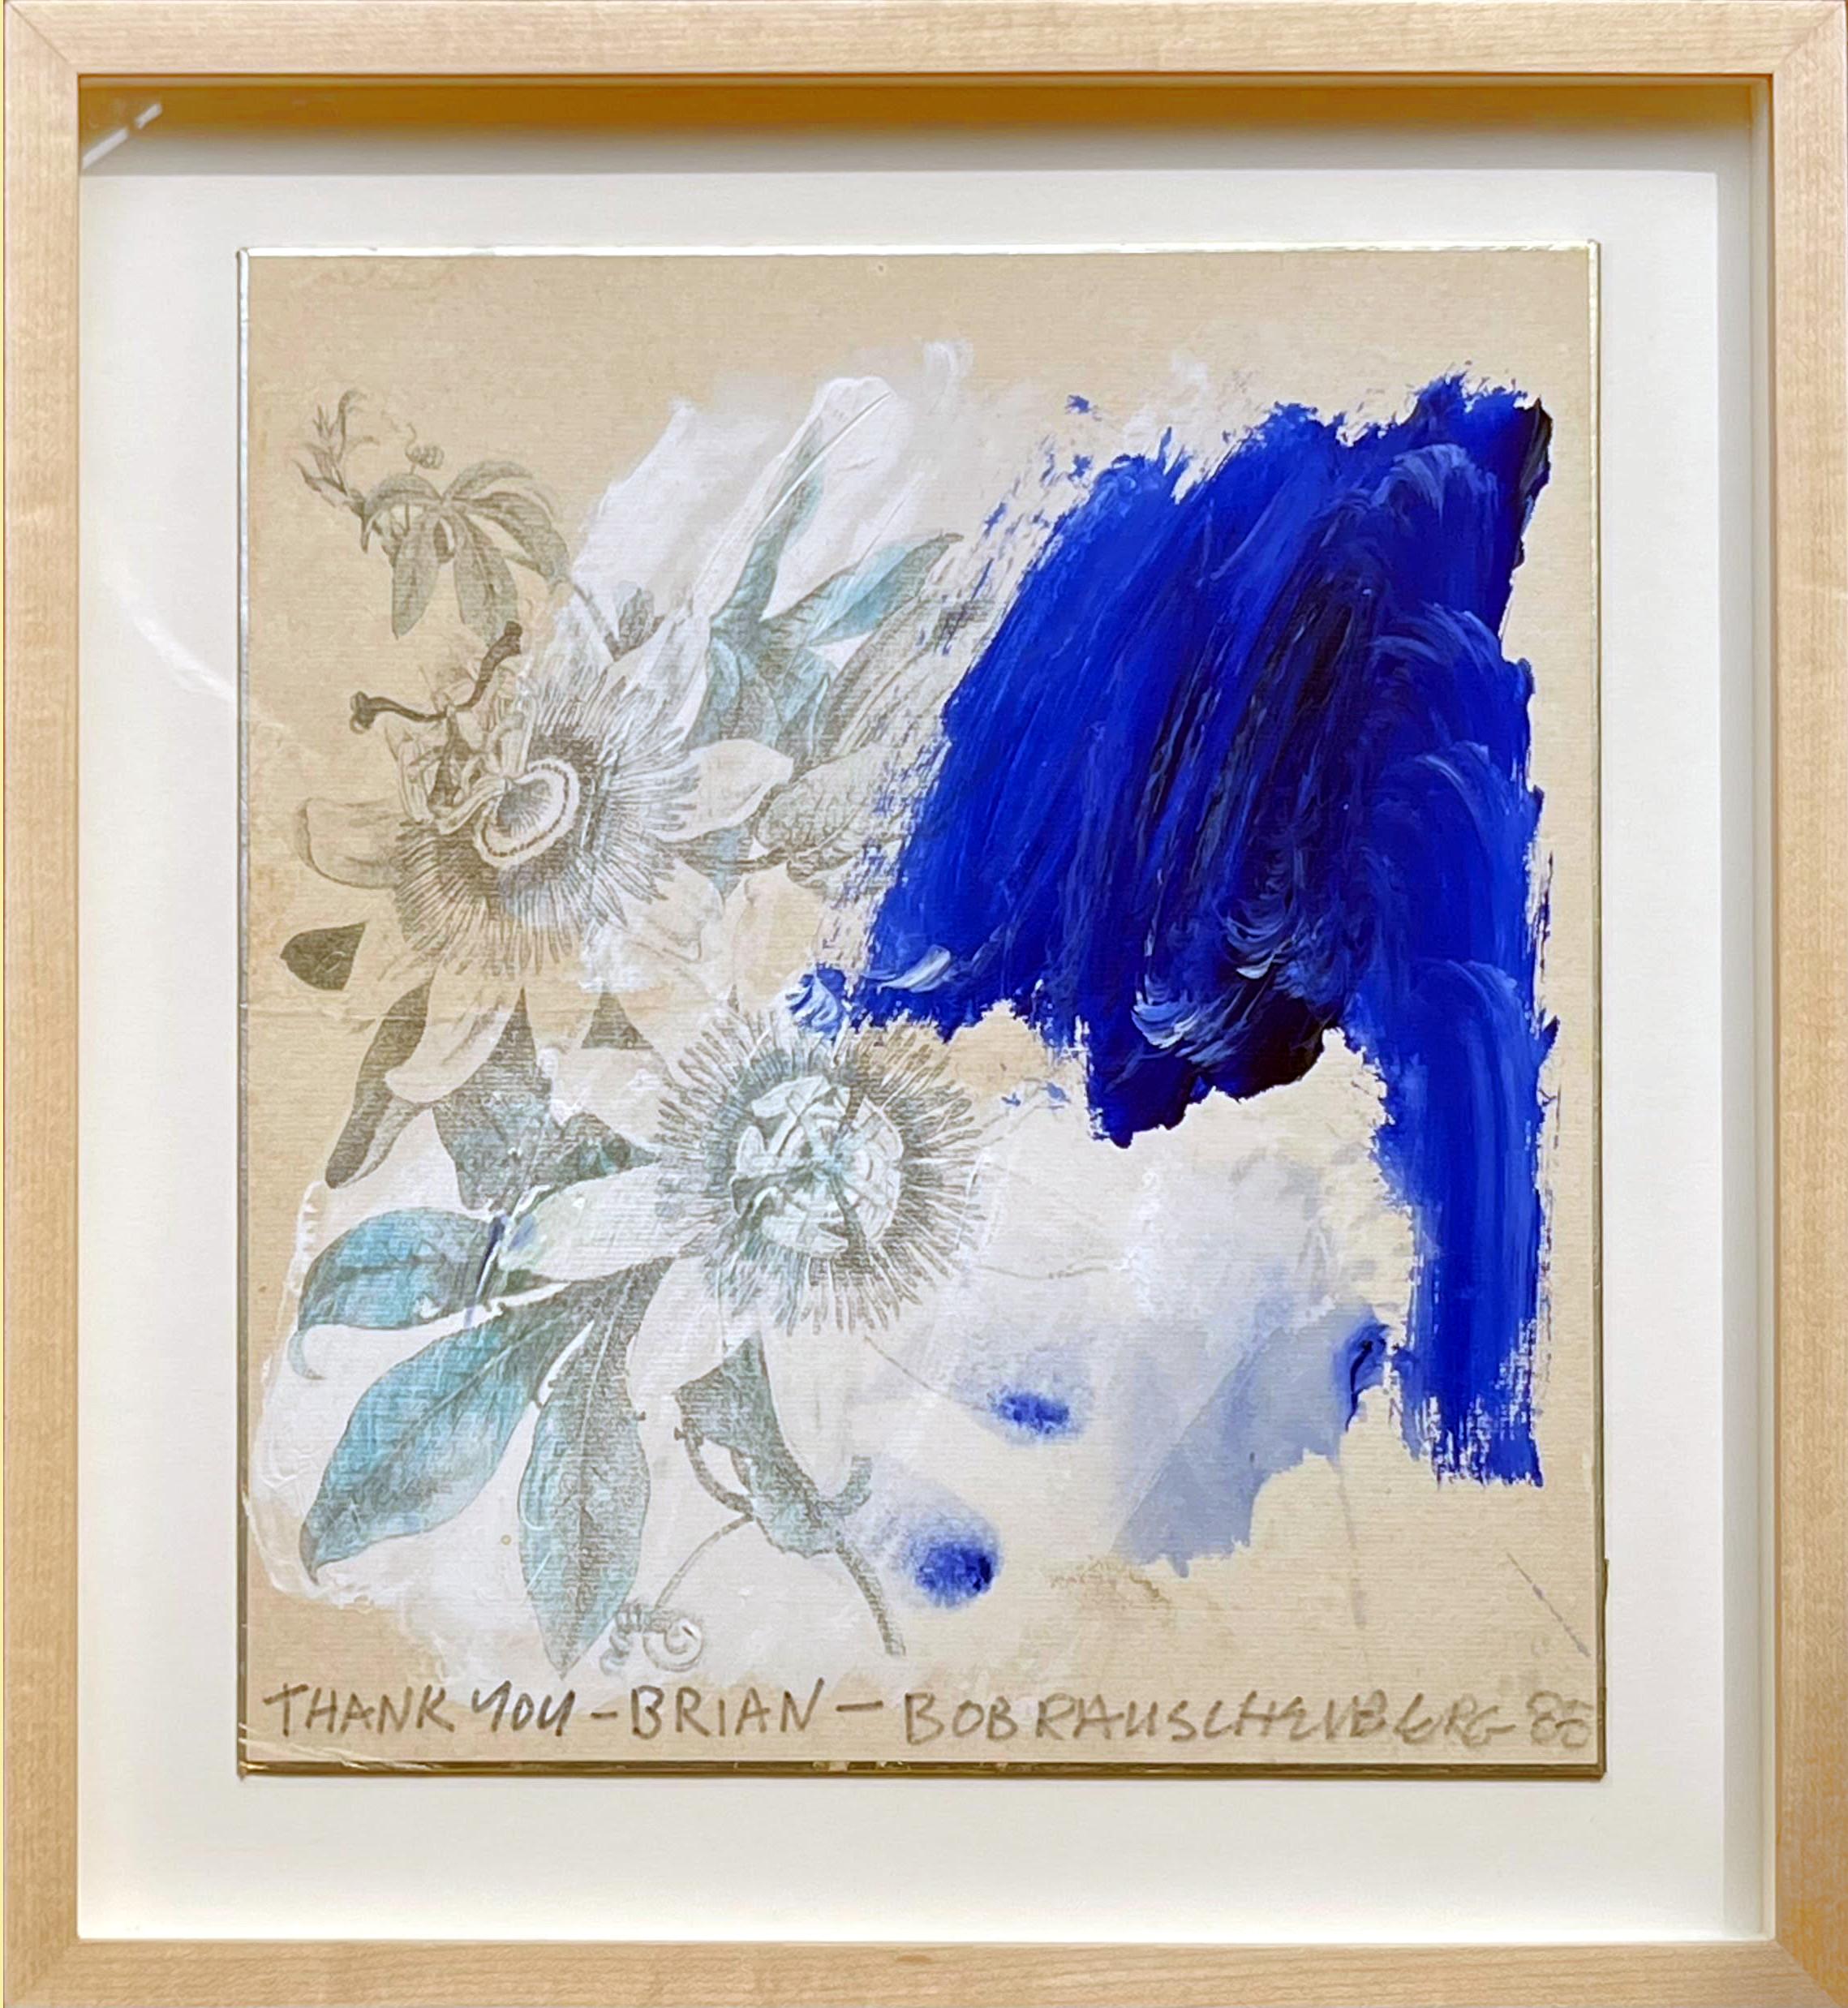 Robert Rauschenberg
Abstract Composition (Robert Rauschenberg Foundation #88.D109), 1988
Solvent transfer, watercolor, and gouache on Japanese dedication board
Hand-signed by artist, Hand Signed and Inscribed "Thank You - Brian - by Rauschenberg on